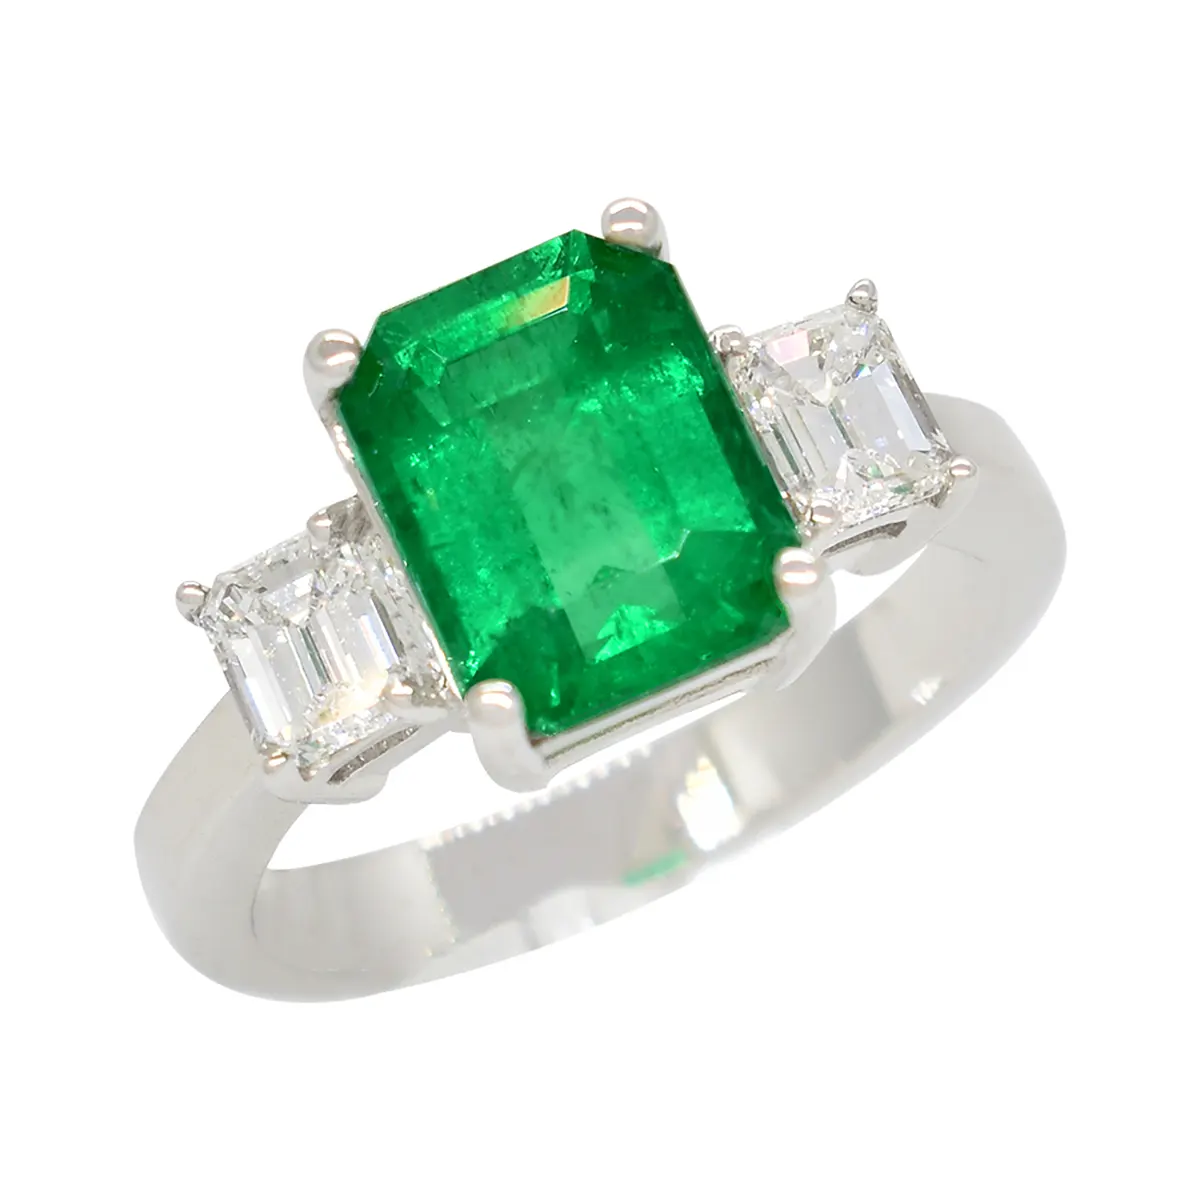 emerald-ring-in-18k-white-gold-with-emerald-cut-diamonds-in-3-stones-style